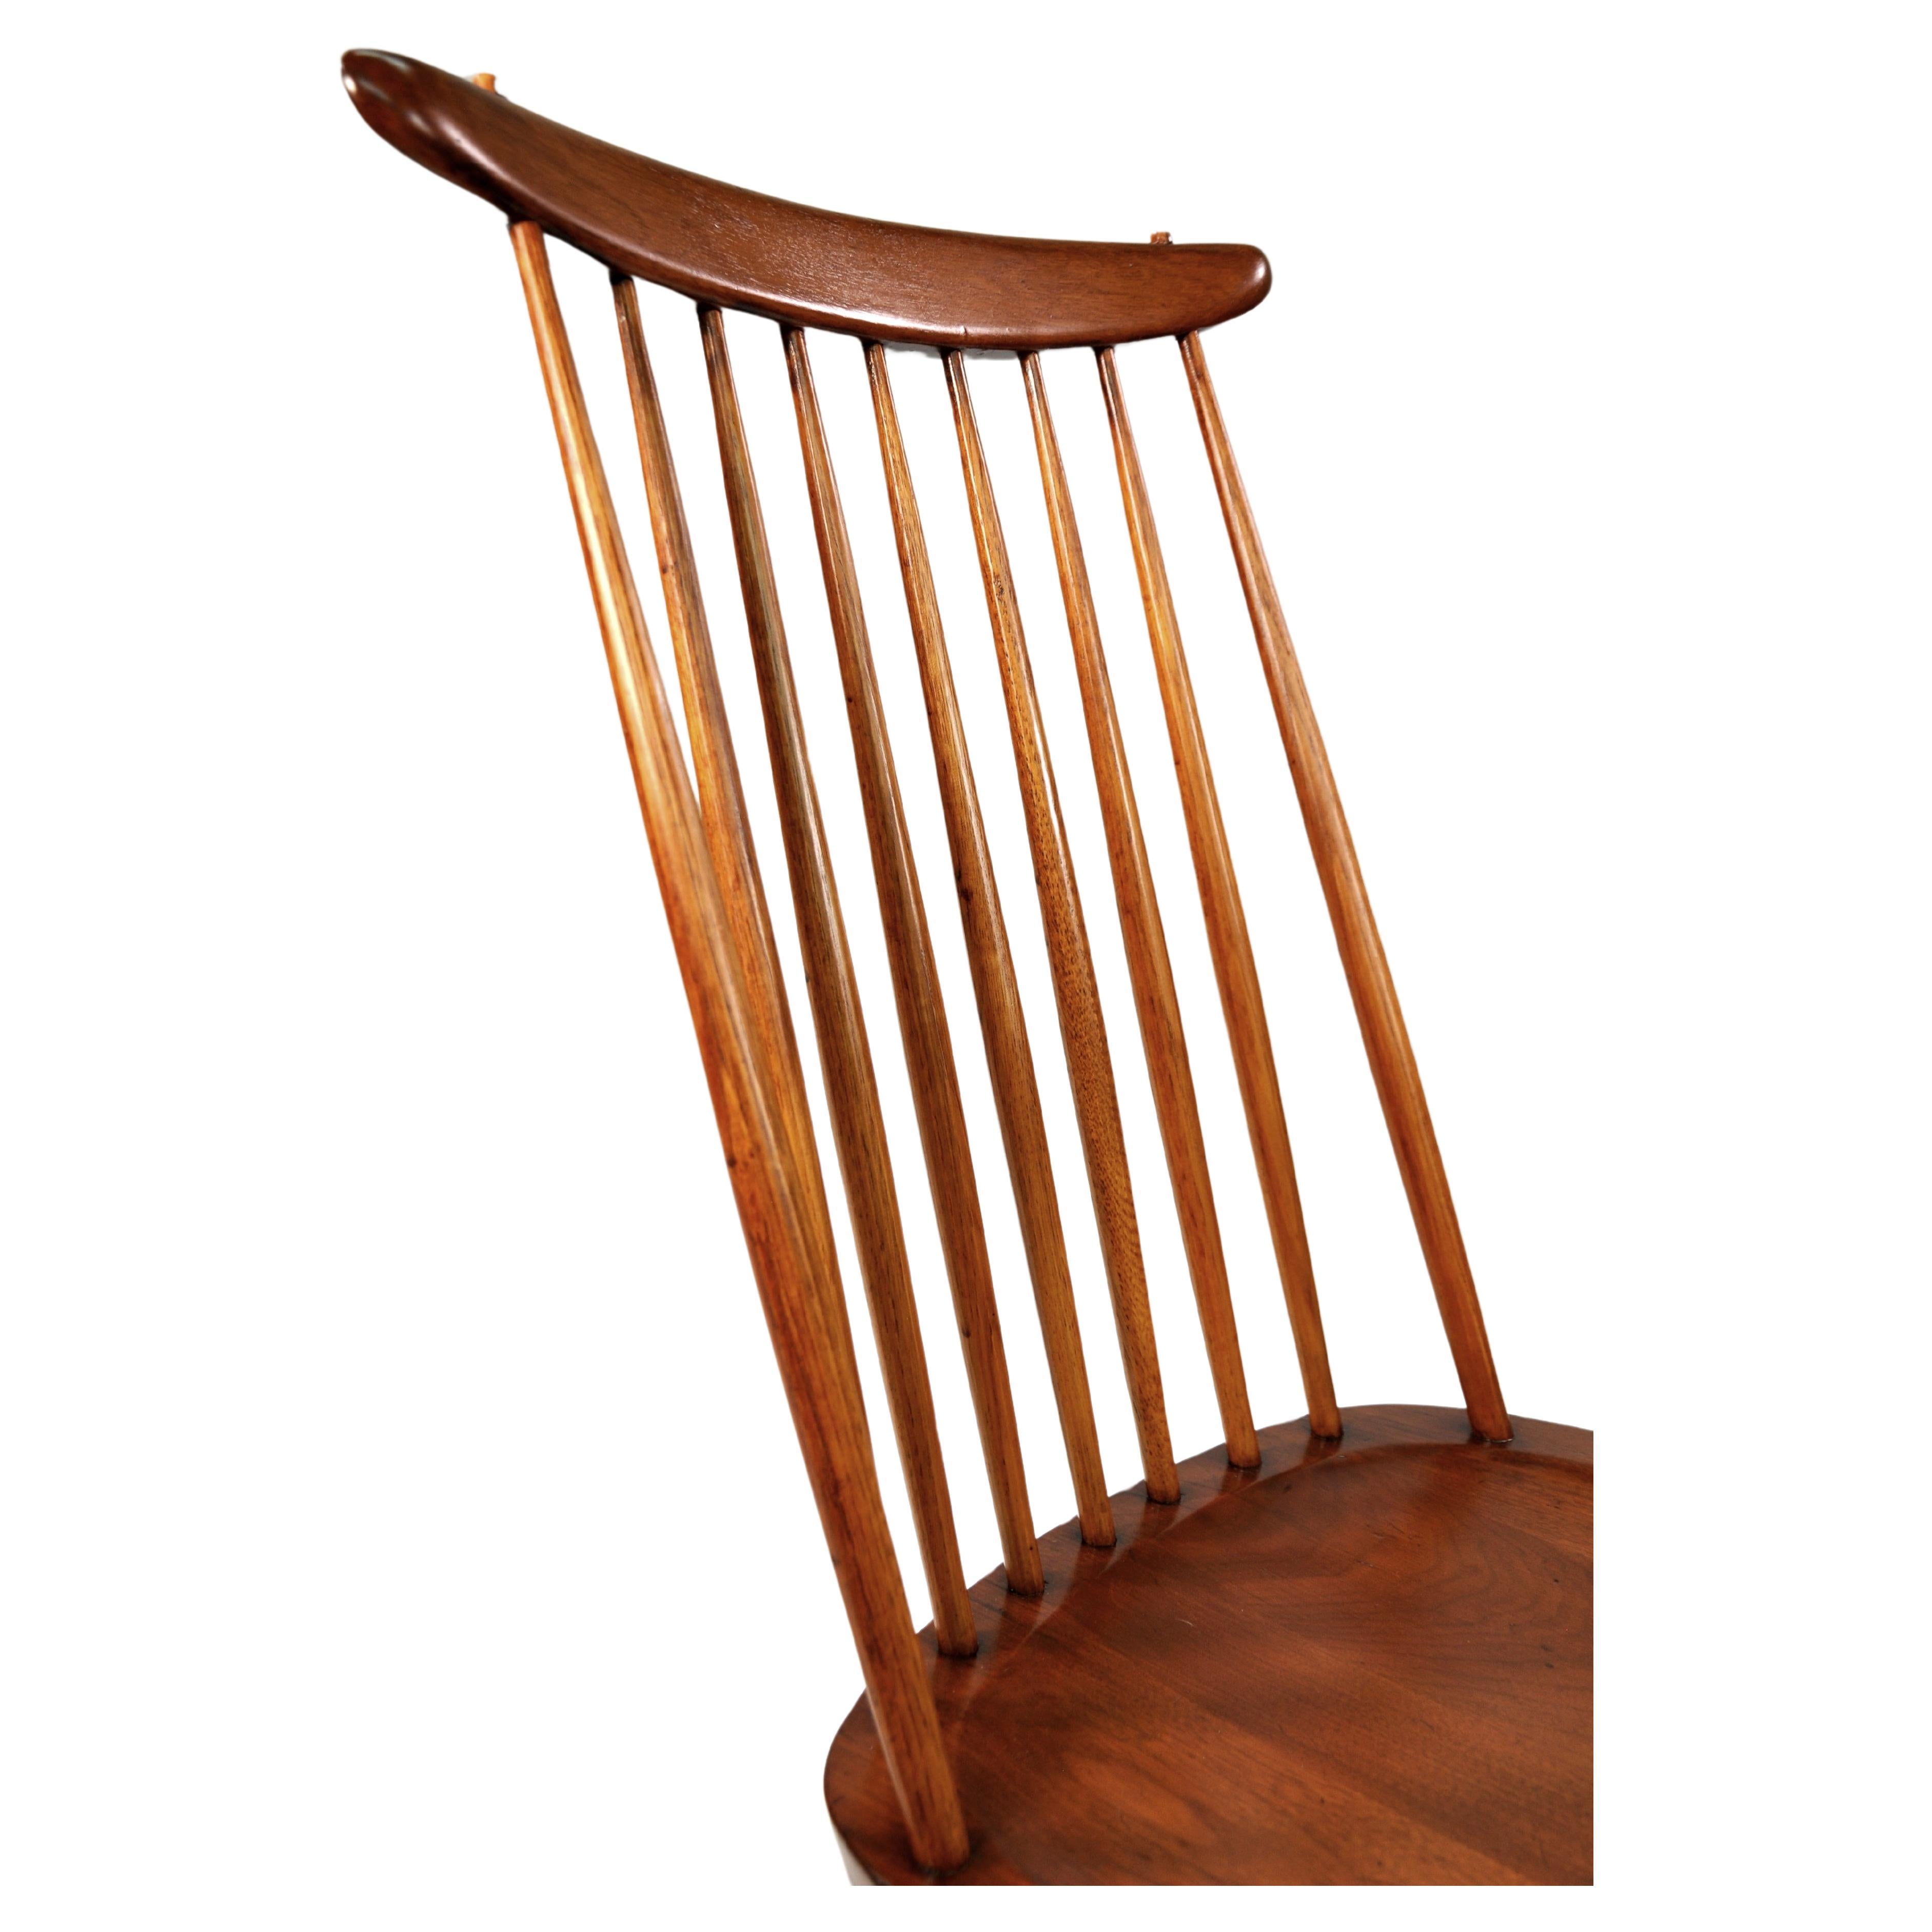 Rare and early model 271 or New Chair, the iconic Windsor spindle back chair reimagined by Japanese-American Master Woodworker, George Nakashima in 1956. East Indian Laurel wood in the original Sundra finish with hickory spindles and sculpted seat.